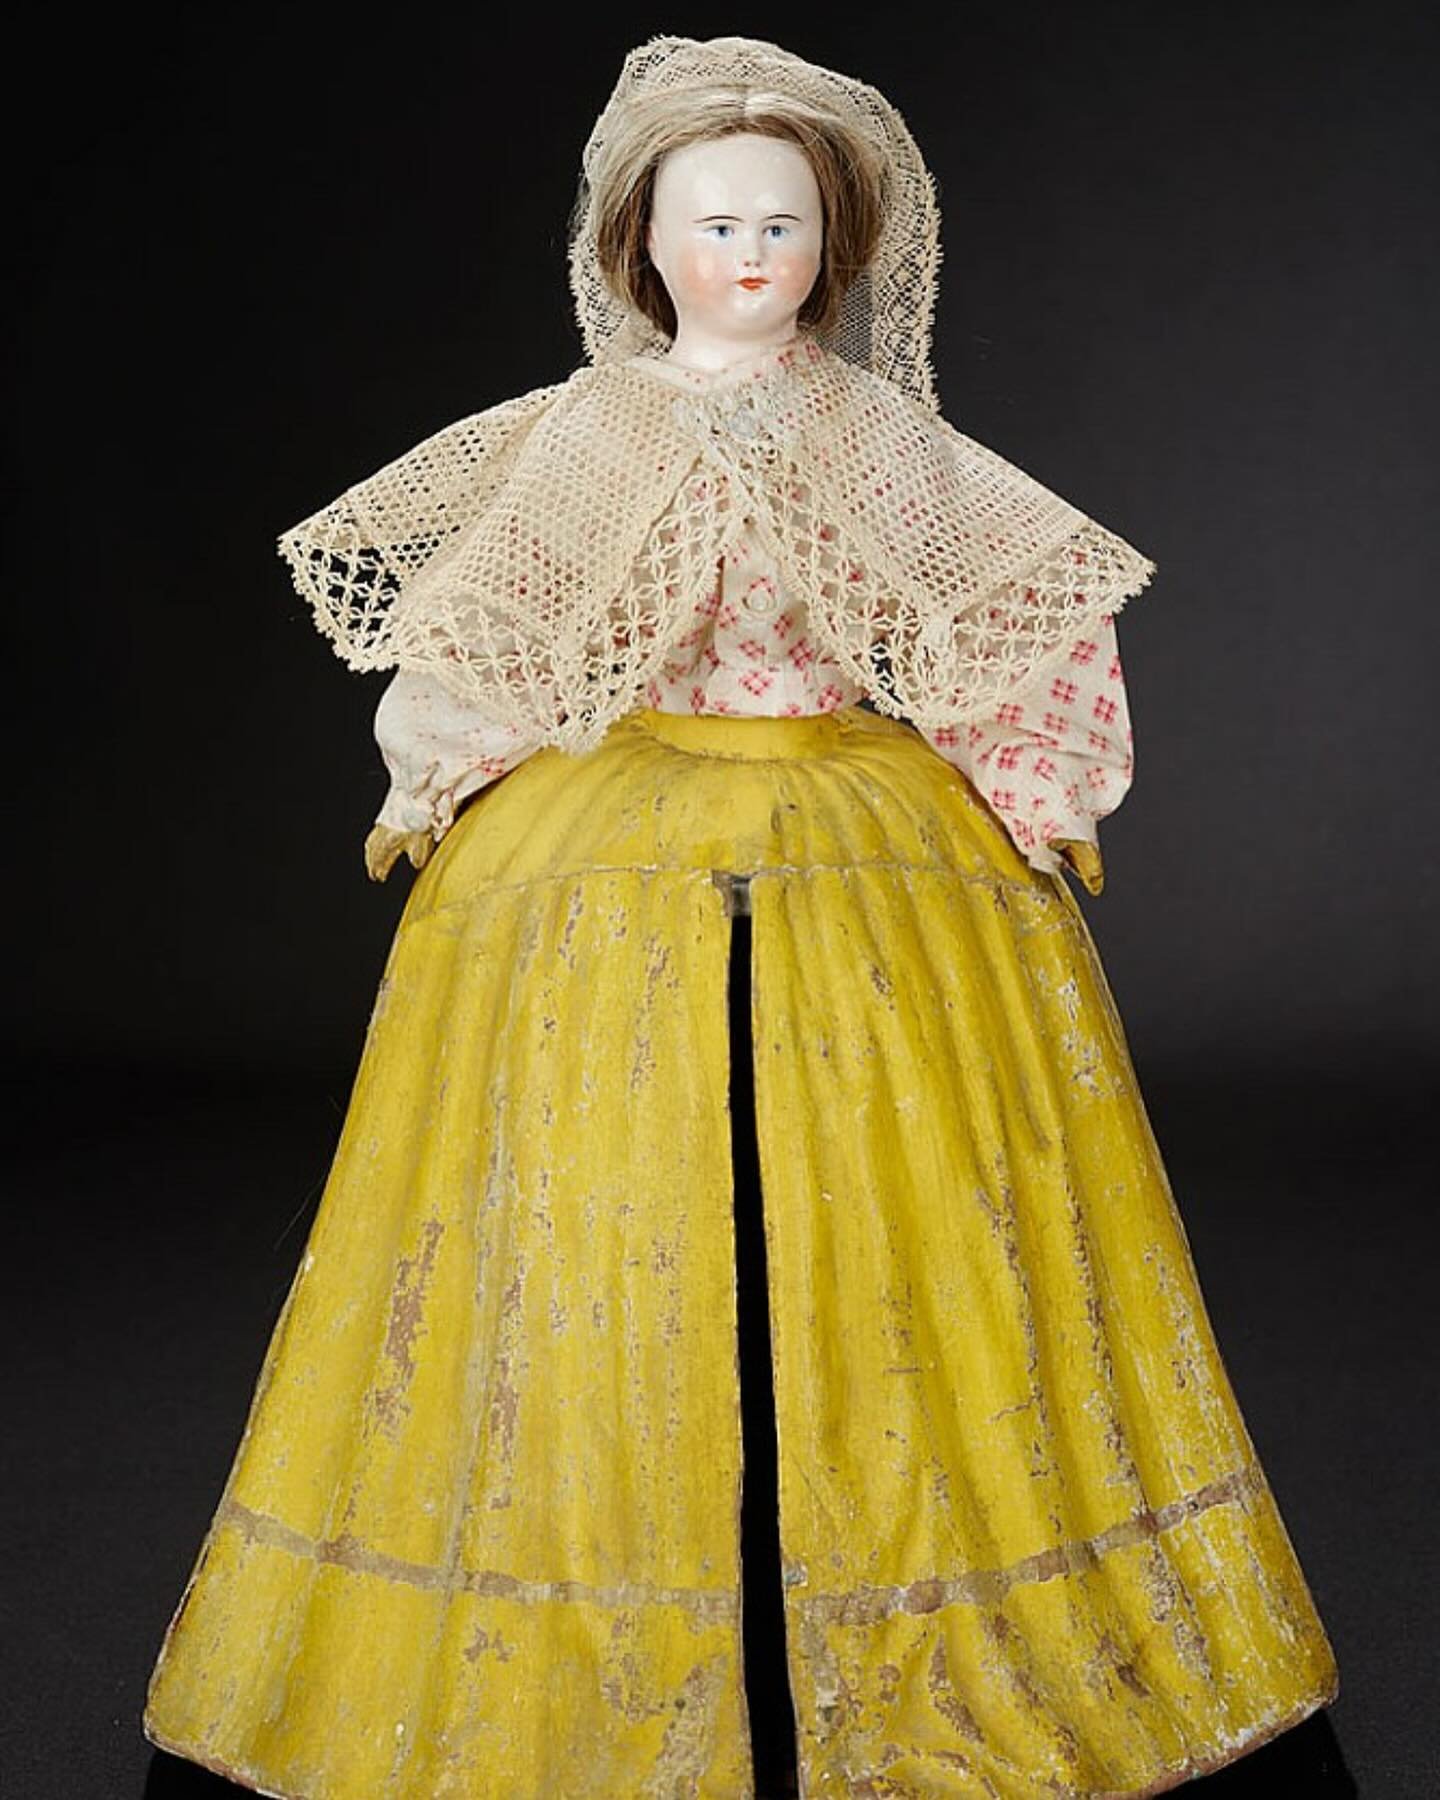 Swipe for a food history surprise!! ➡️
A porcelain doll made by Jacob Petit in France c. 1860. The skirt opens to reveal a miniature kitchen complete with lithographed tile paper walls and floors, a paper-covered brick stove, and tinware plates, pots